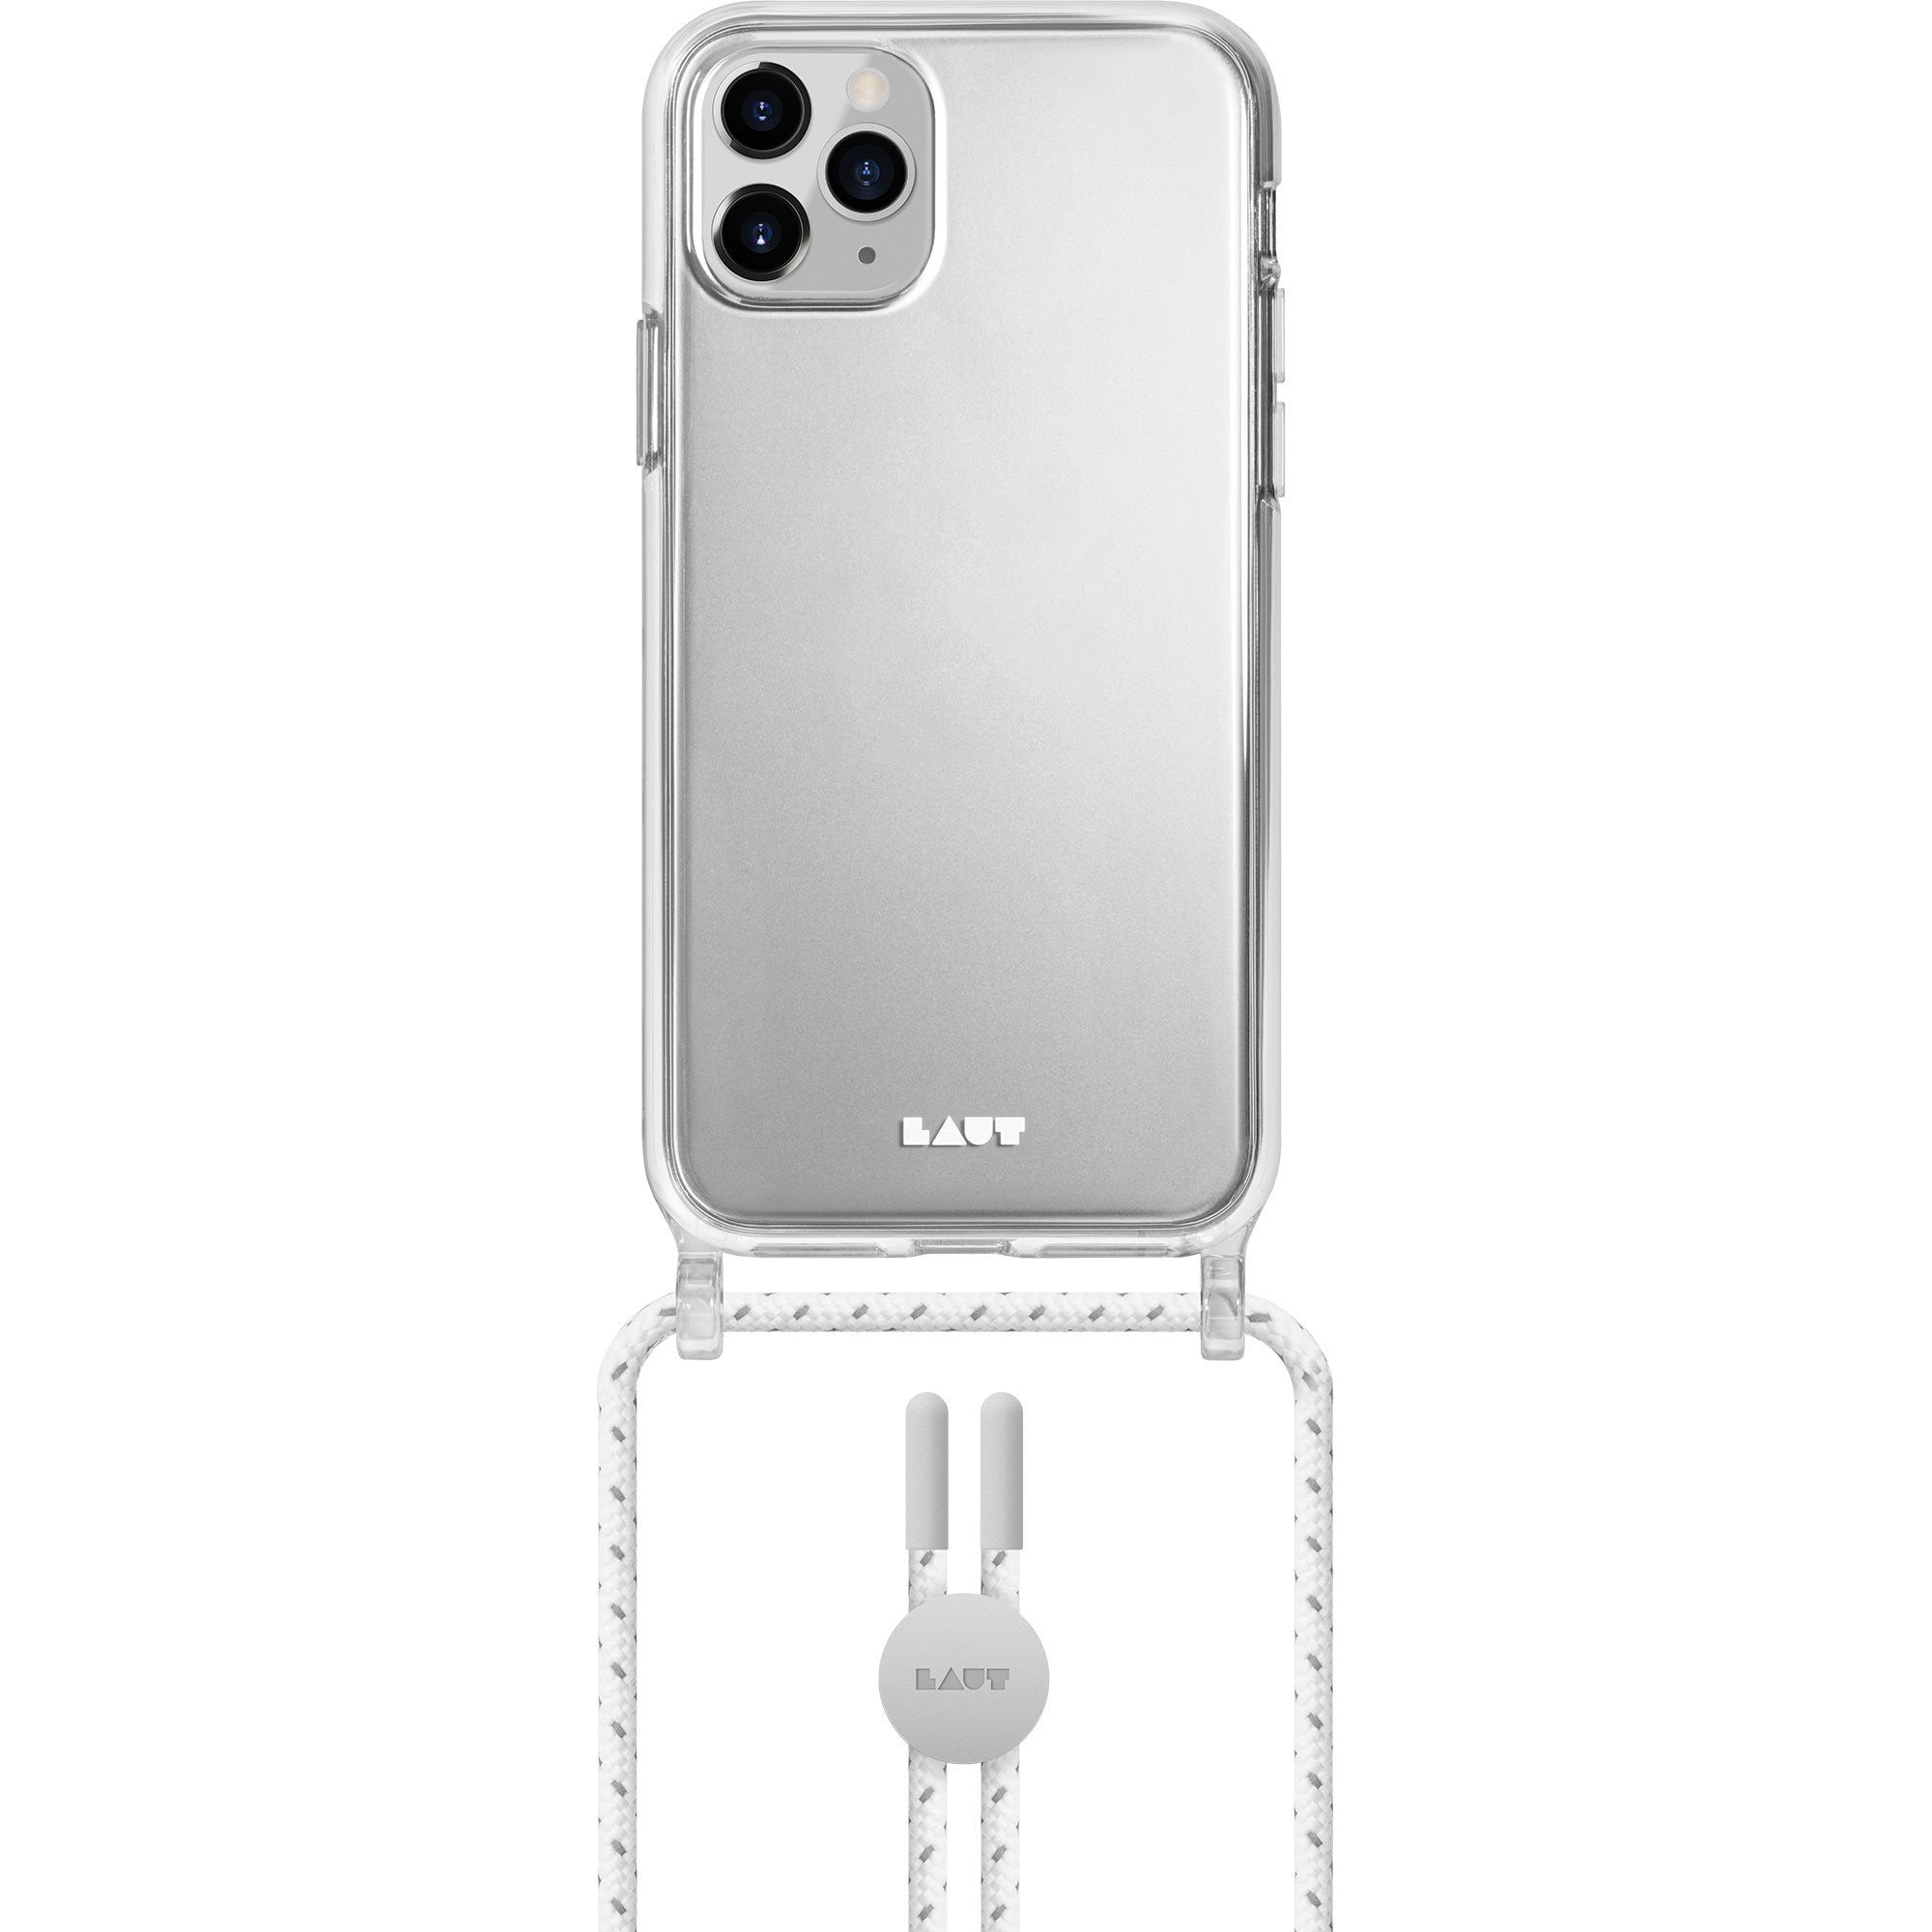 CRYSTAL-X NECKLACE case for iPhone 12 series